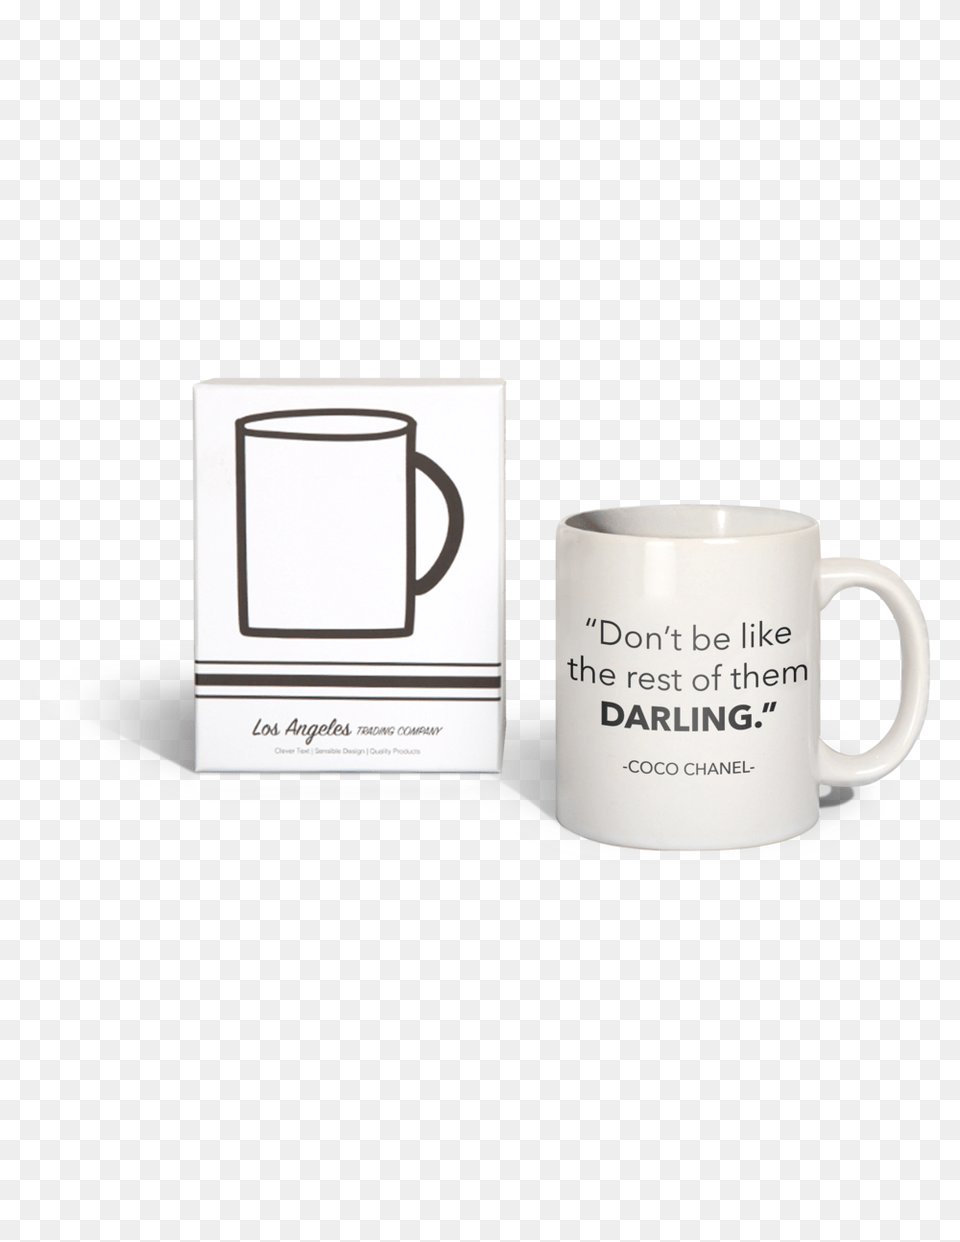 Mug 15 Oz Donu0027t Be Like The Rest Darling Coco Chanel Mug, Cup, Beverage, Coffee, Coffee Cup Free Transparent Png